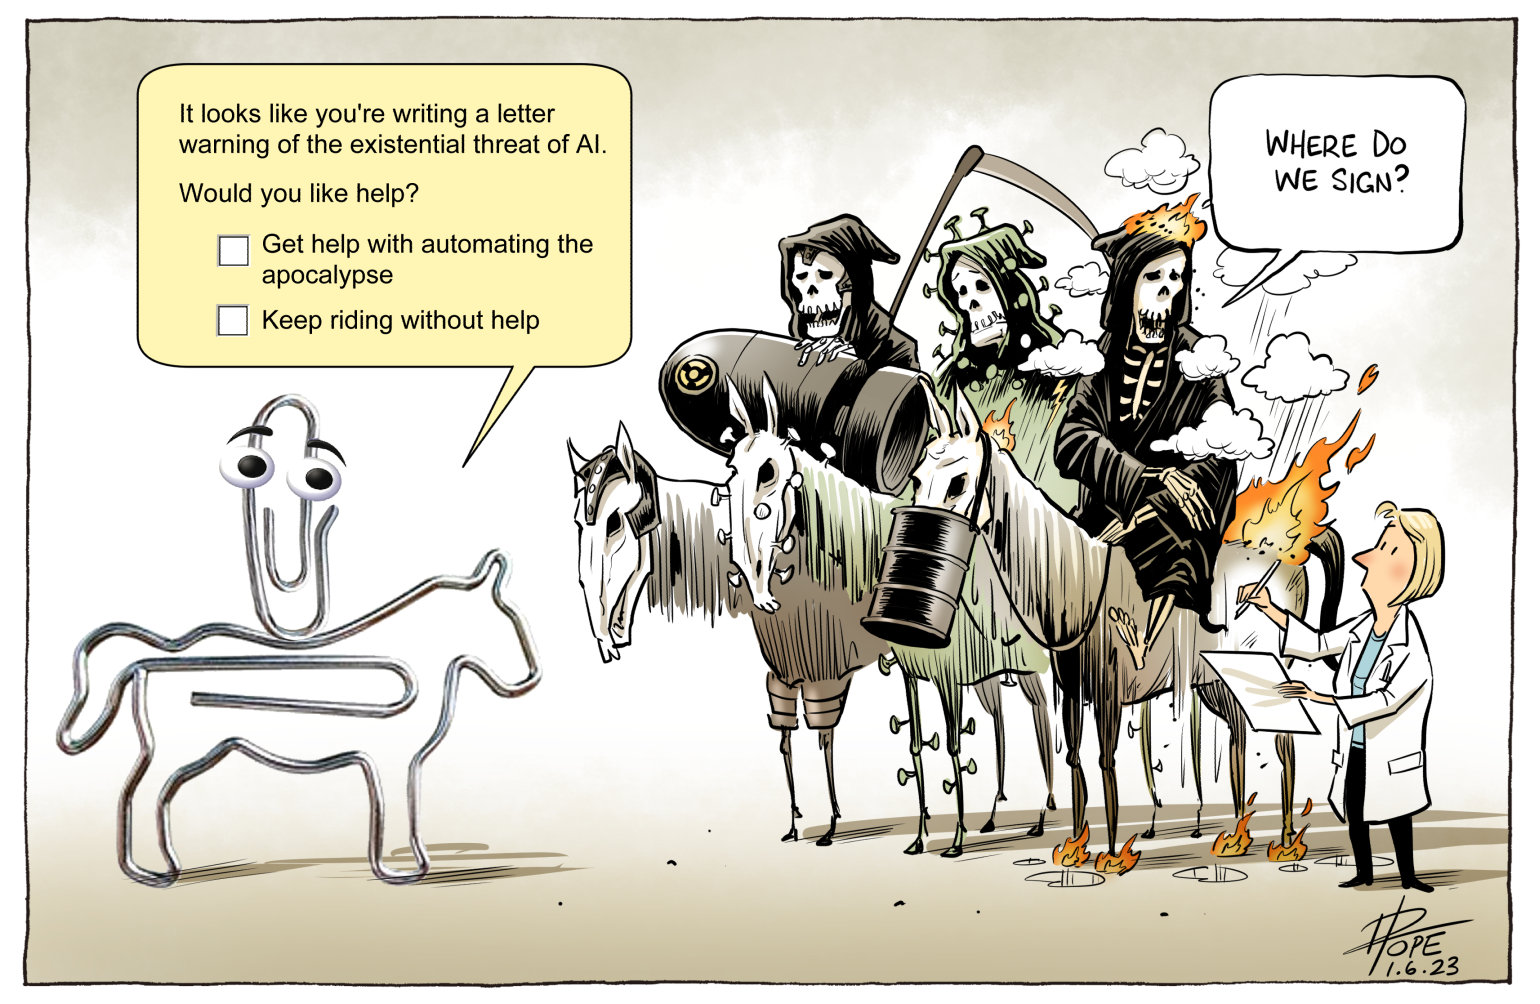 A cartoon about the rise of Artificial Intelligence. We see three horsemen of the apocalypse casting a wary eye over a possible fourth member, represented by Microsoft's "Clippy" paperclip icon, sitting on a paperclip horse. 